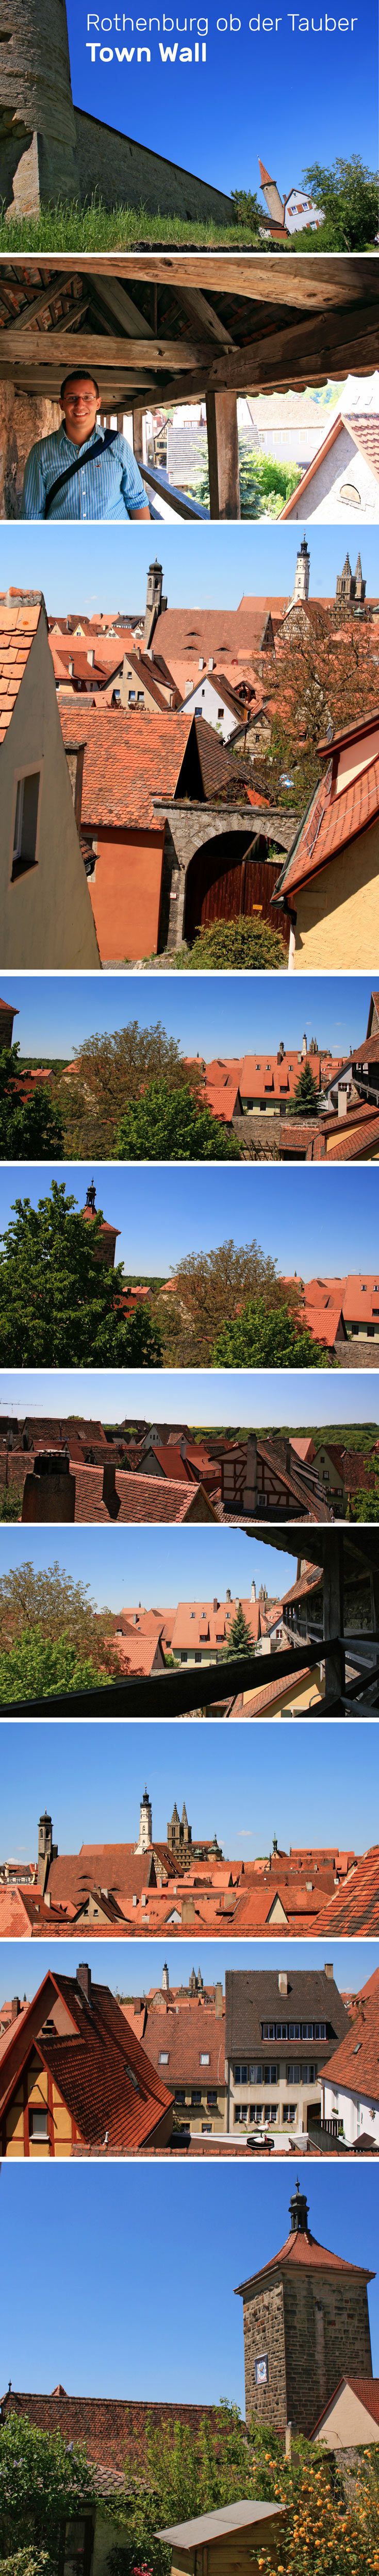 Various views you can enjoy from a walk along the historic town wall of Rothenburg ob der Tauber